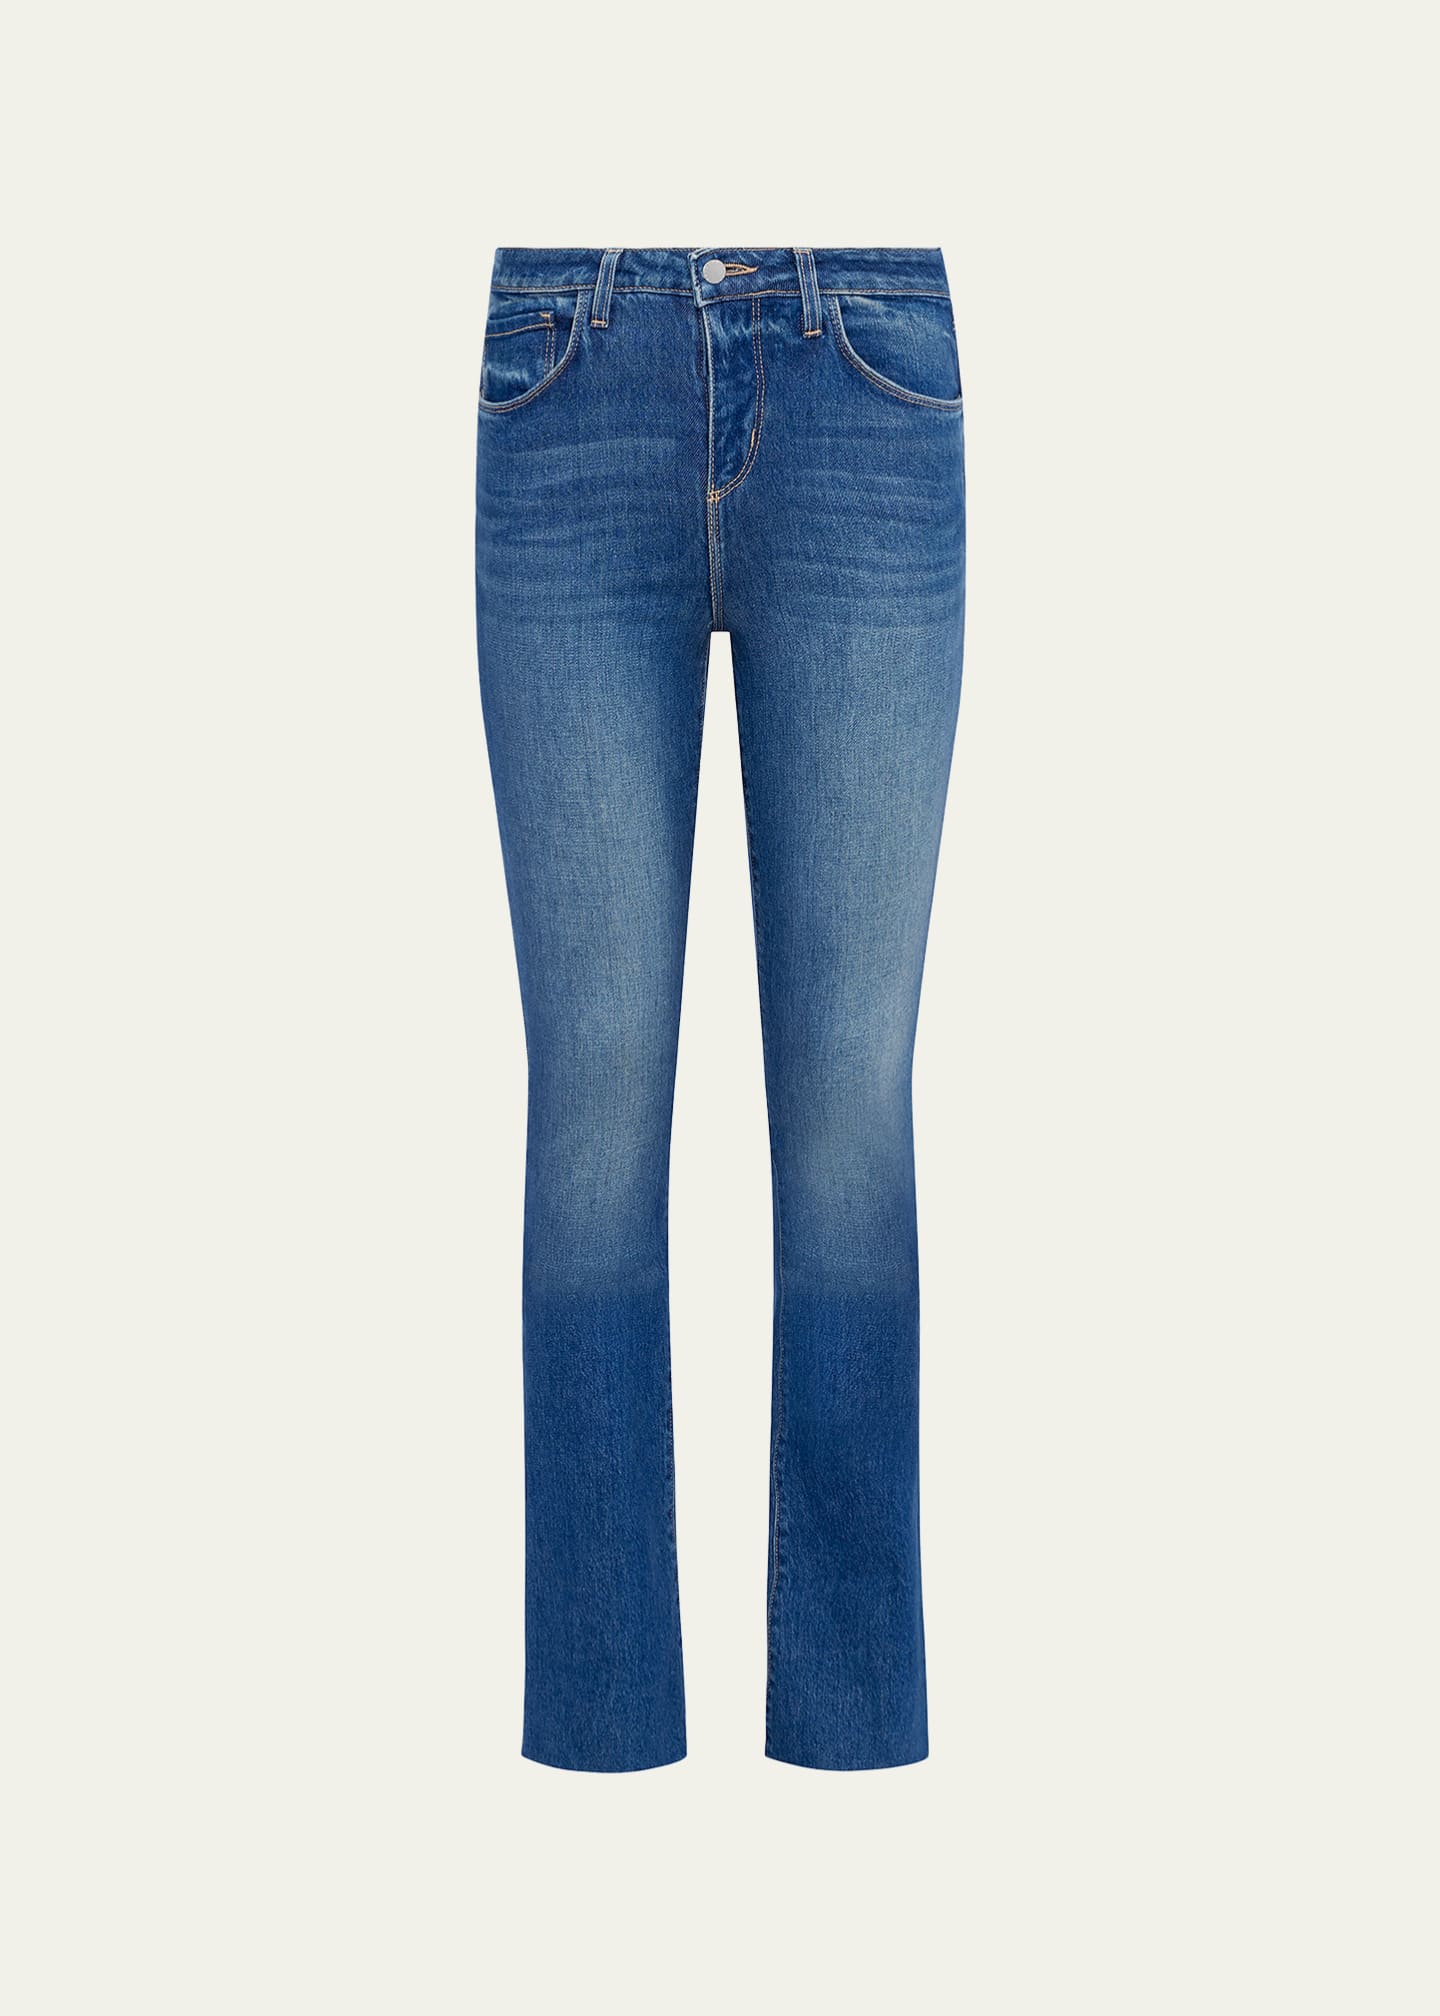 L'Agence Ruth High-Rise Straight Jeans - Bergdorf Goodman